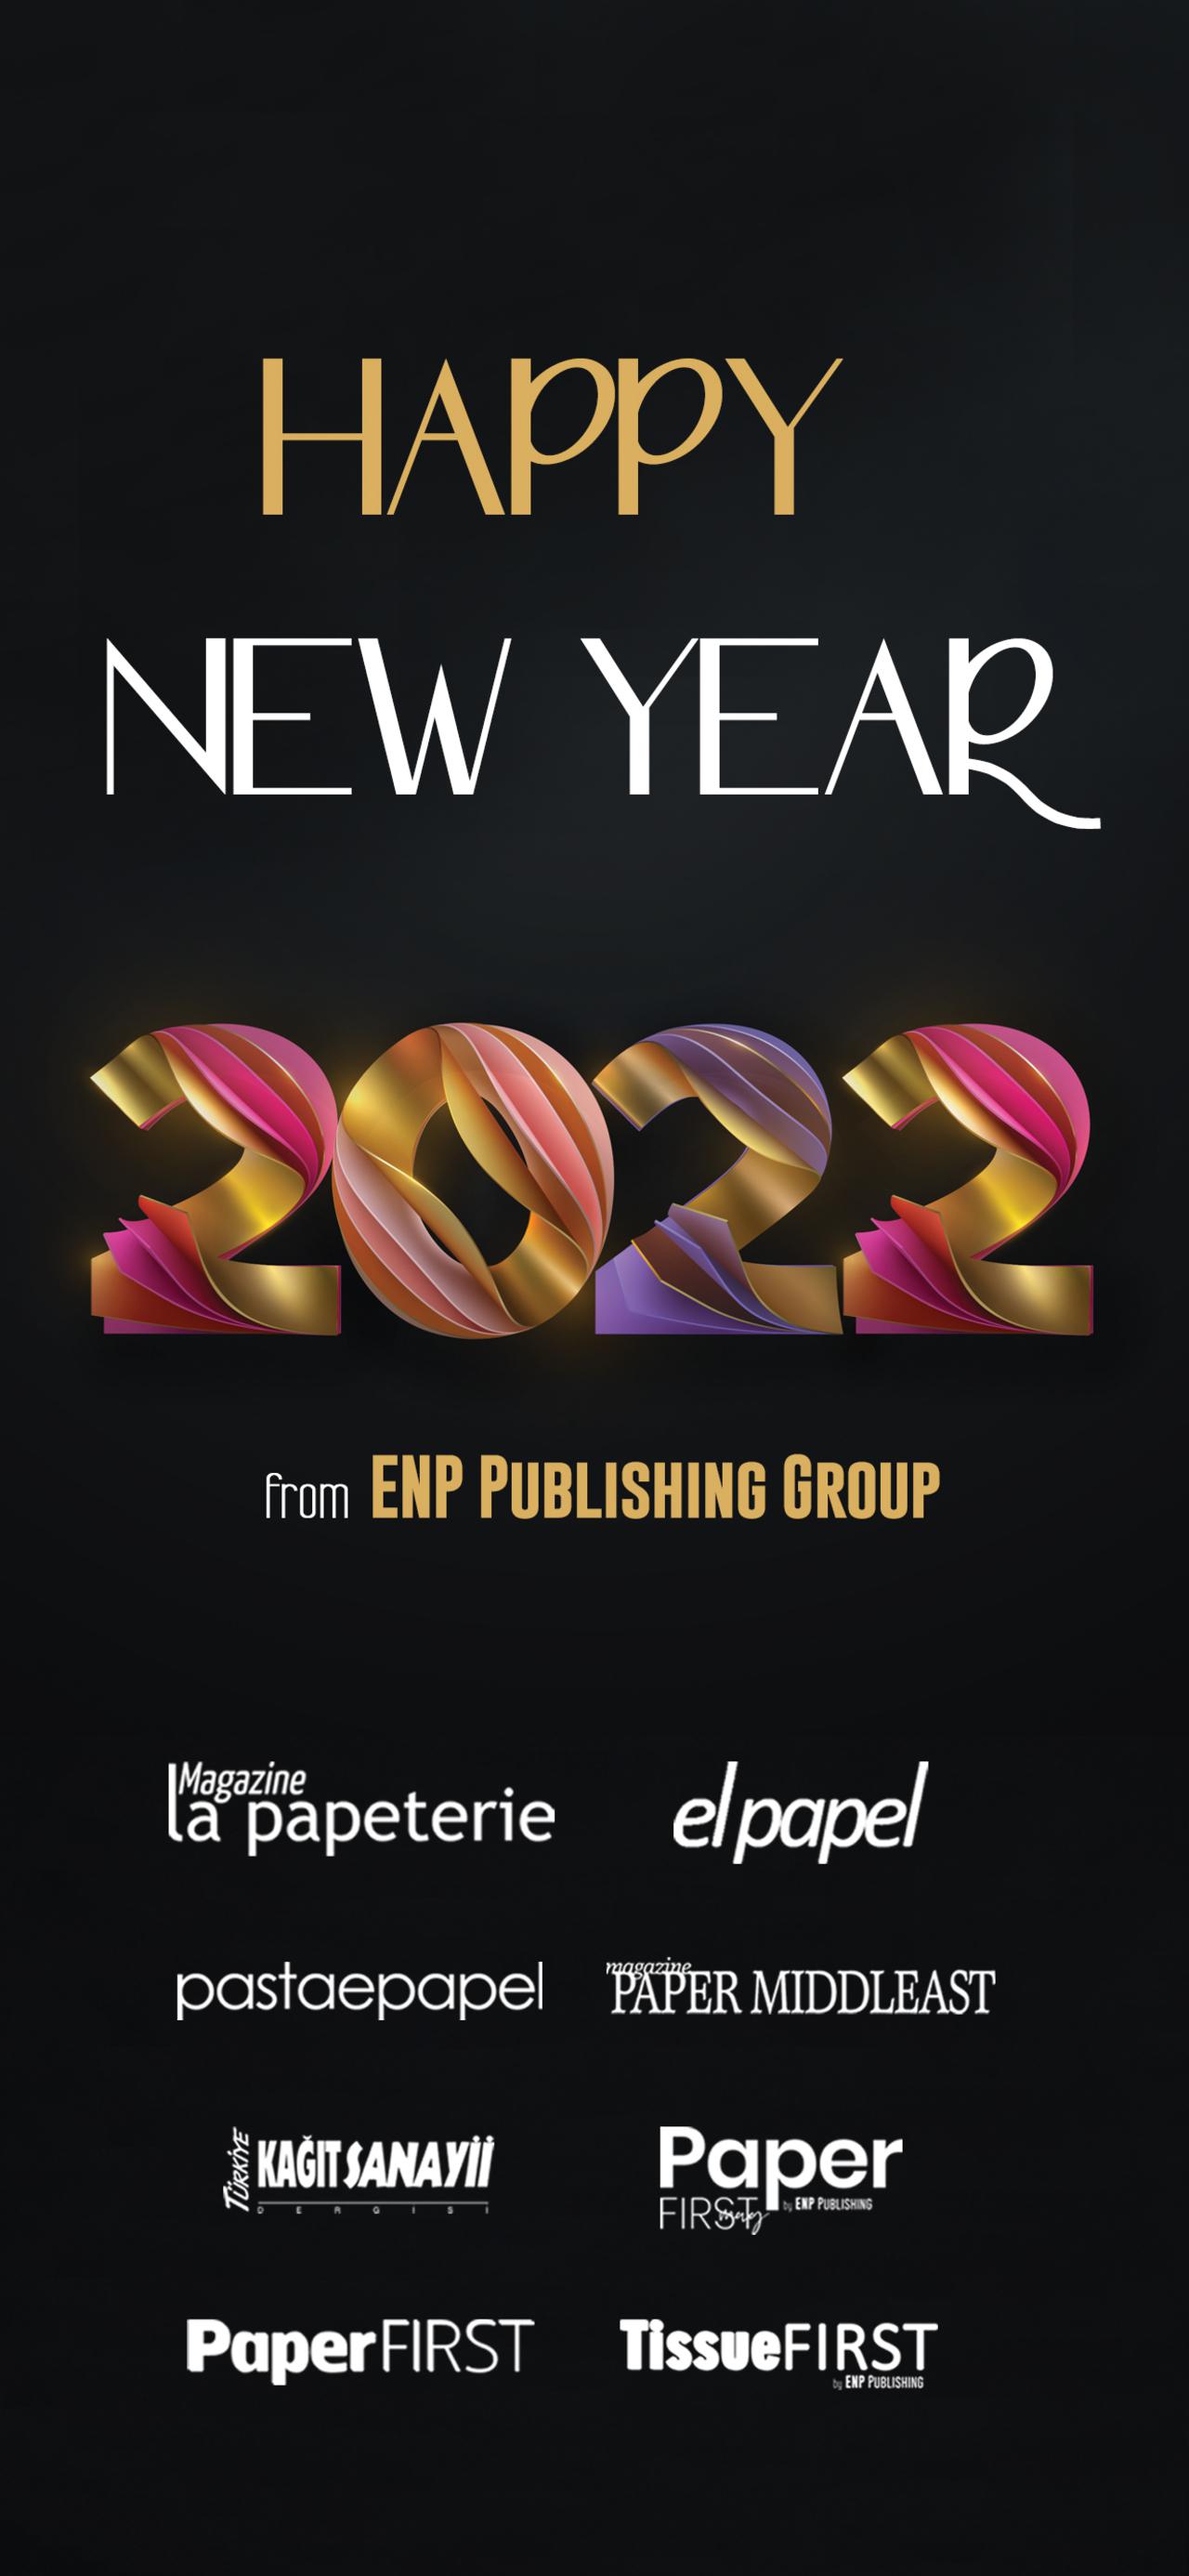 Best Wishes from ENP Publishing